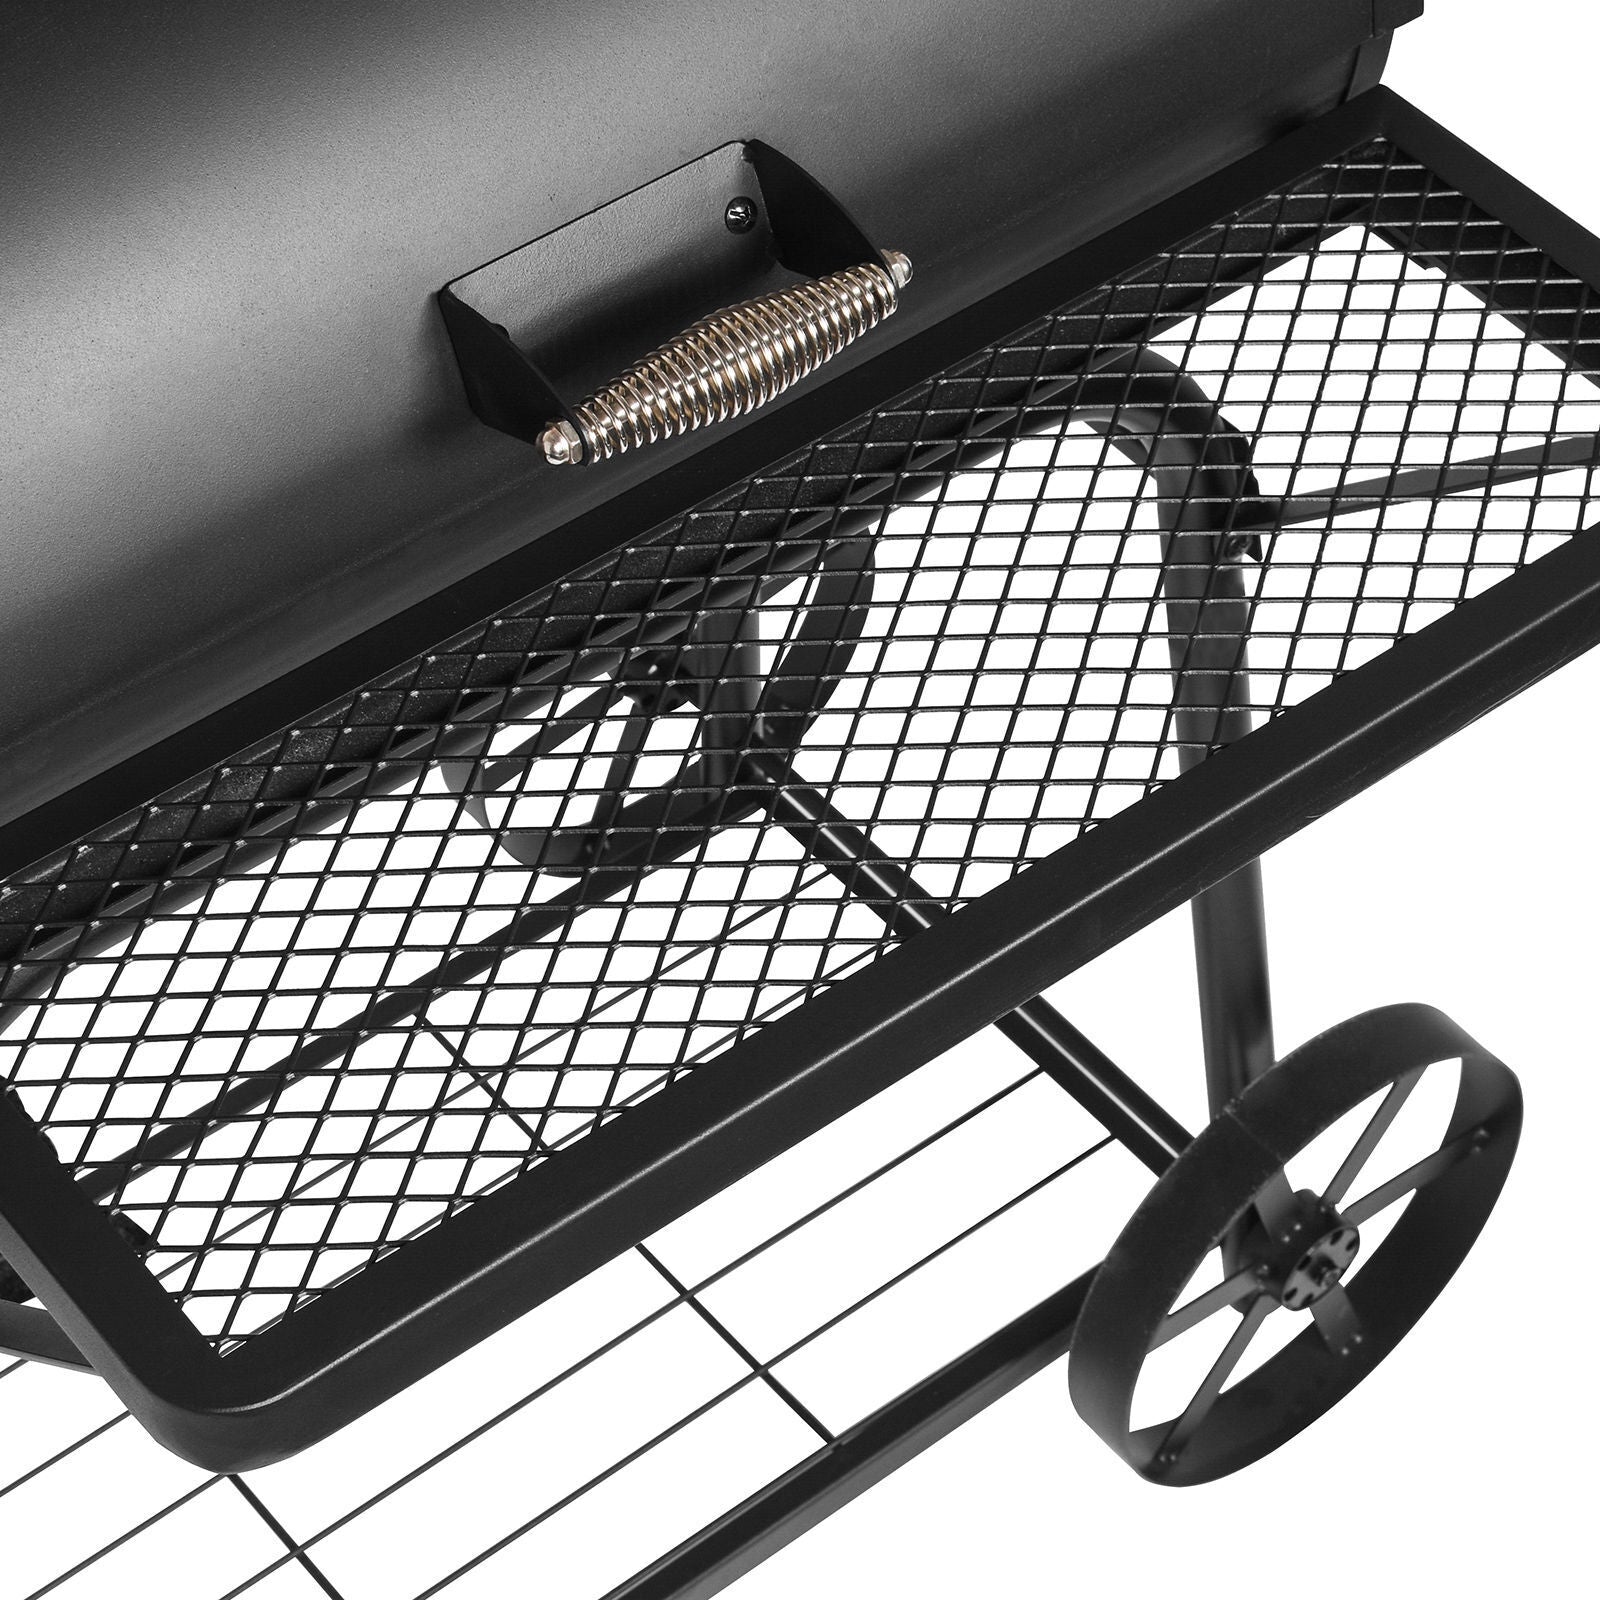 Havana Outdoors Charcoal 2-IN-1 BBQ Smoker Grill Barbecue Outdoor Cooking - SILBERSHELL